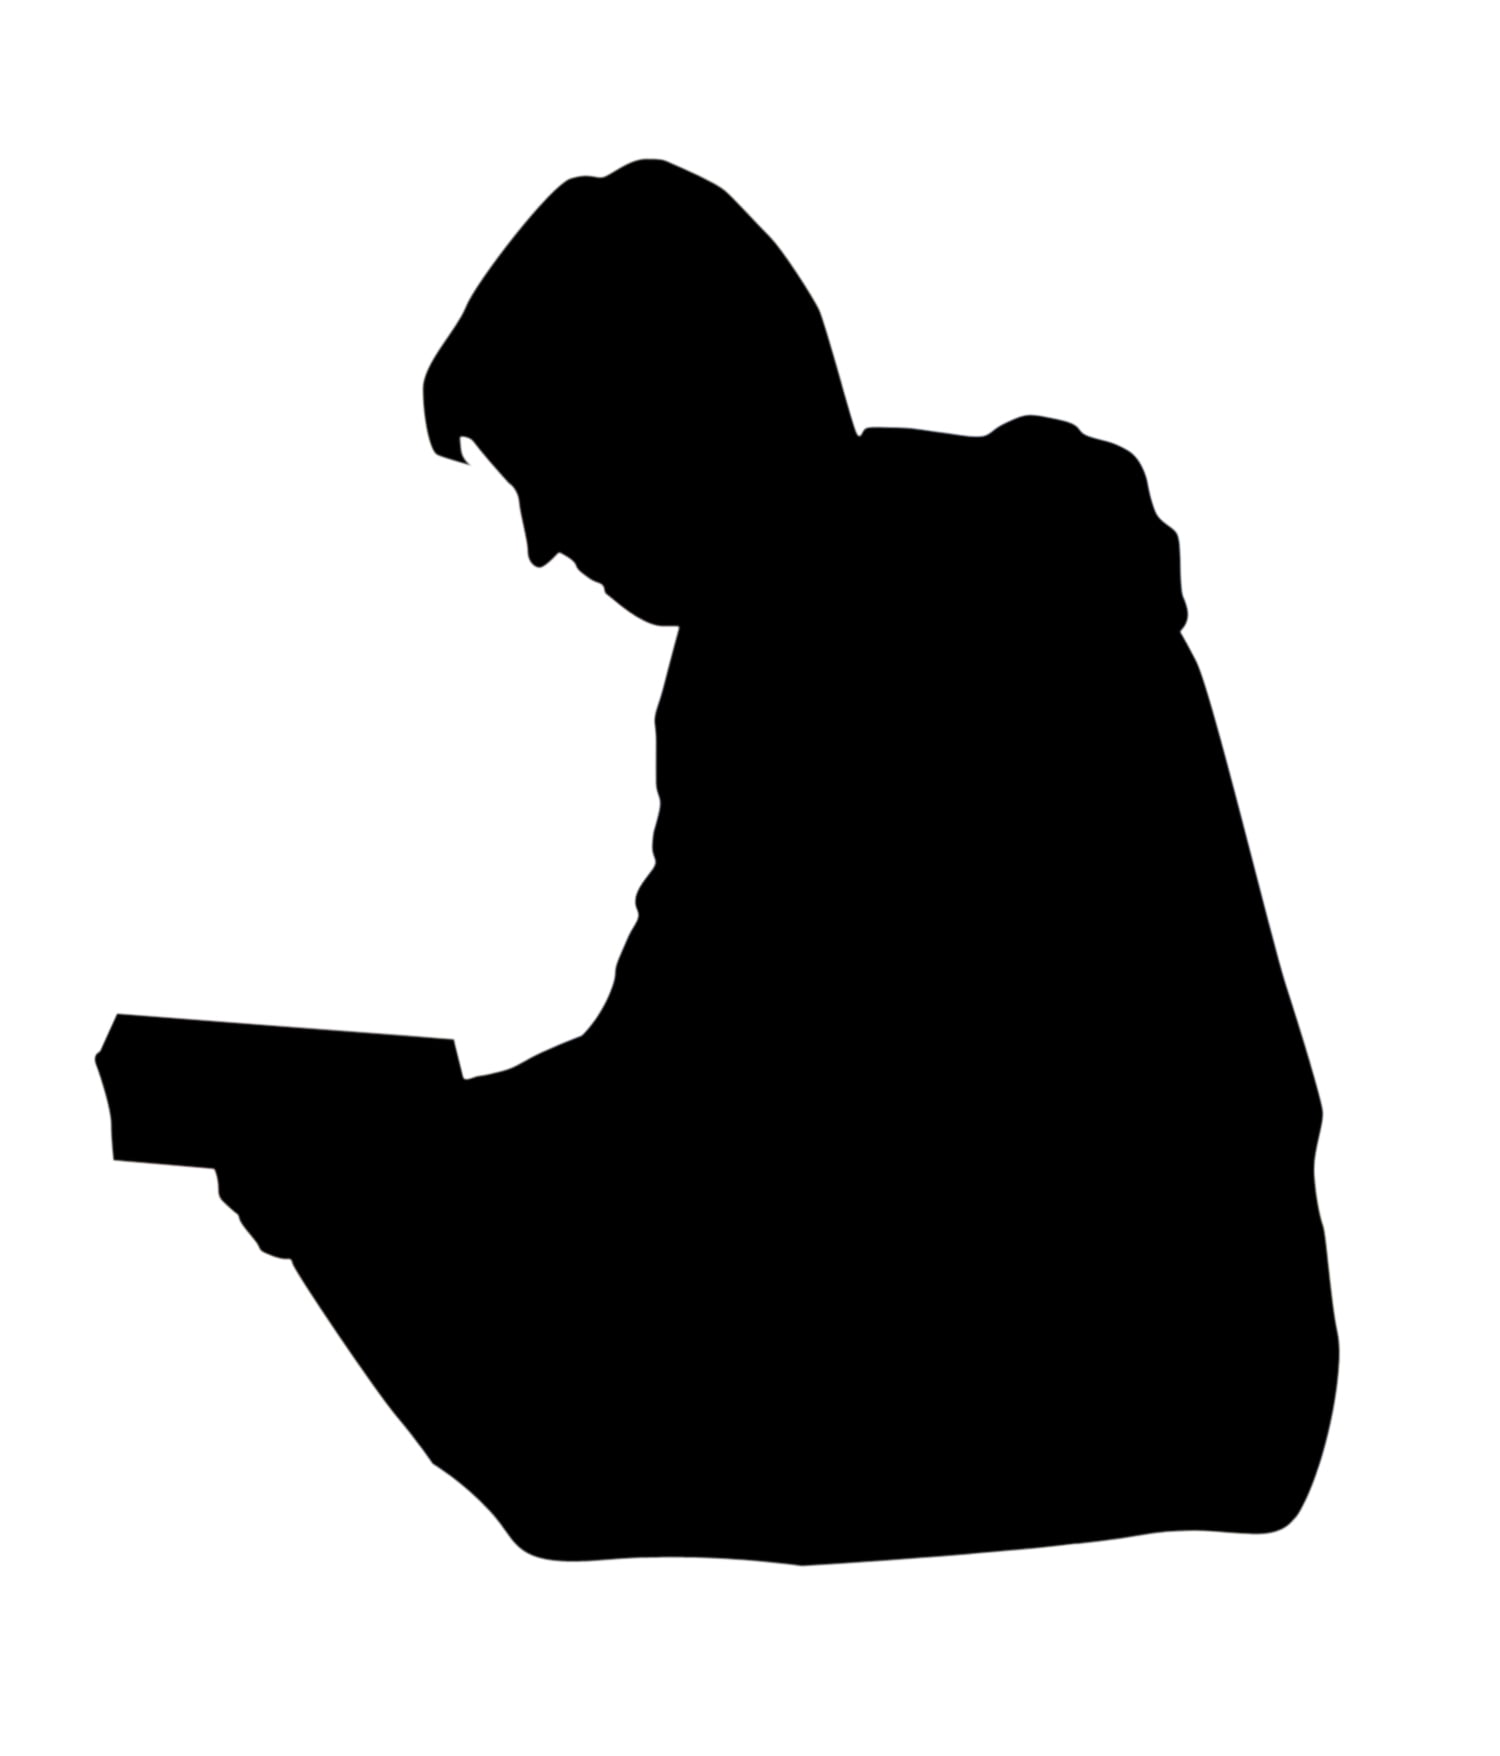 SIlhouette Of A Man Reading A Book